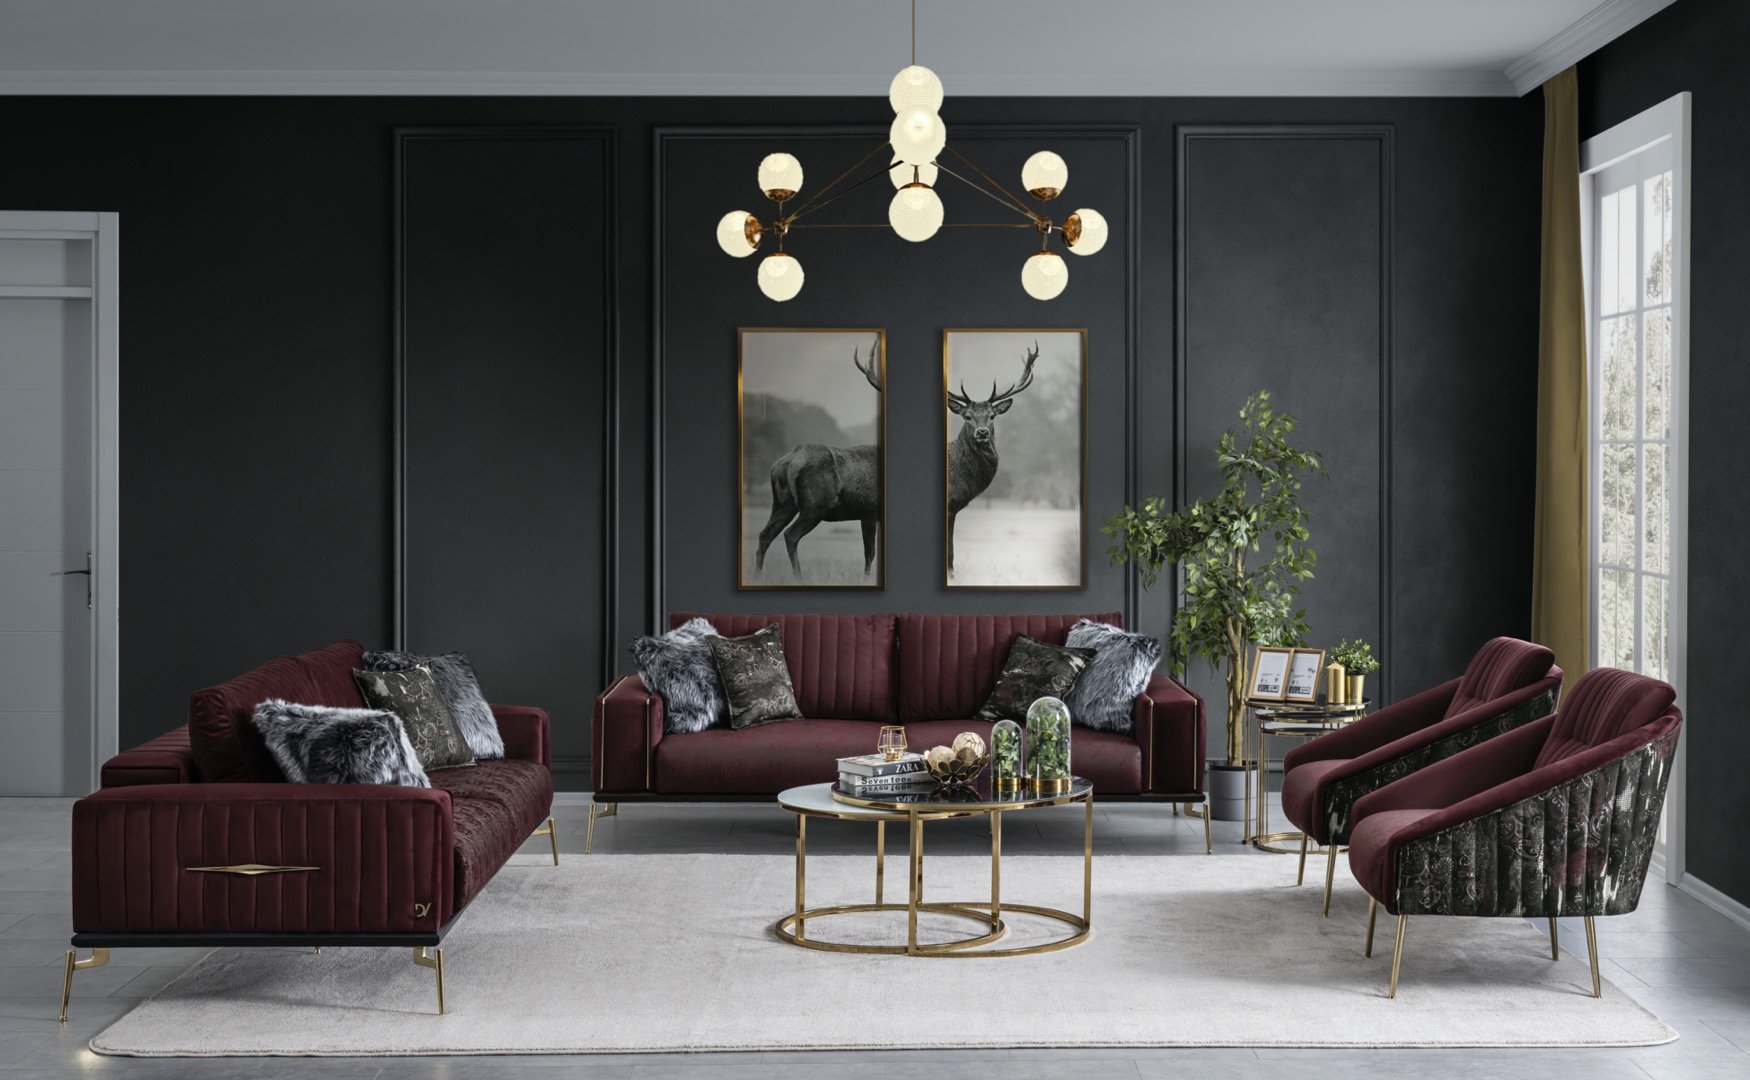 8 Interior Design Trends for 2021 - Home Looks